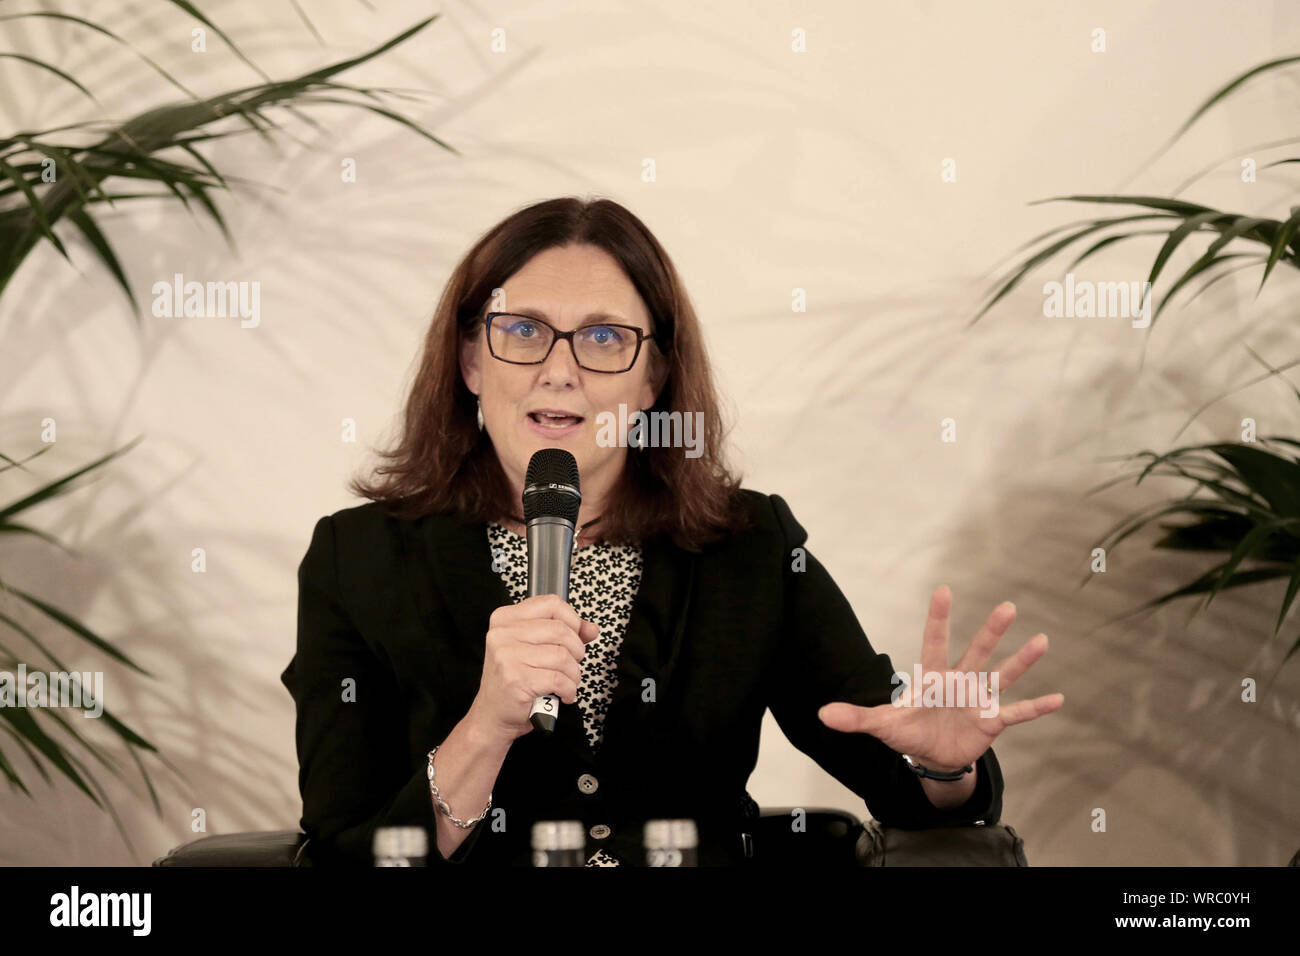 Madrid Spain; 10/09/2019.- Cecilia Malmström European Commissioner for Trade, participates with Luis Planas Minister of Agriculture, Fisheries and Food, in a dialogue with citizens where they answered questions about European trade after Brexit, Amazon deforestation and repercussion in Europe, trade agreements with countries such as Vietnam, Mexico, the United States and others.During this event, the candidates of the new European government of Ursula von der Leyen, which presents Phil Hogan in Commerce, were known. Irish politician, between 2011 and 2014 he was Minister of the Environment, Stock Photo